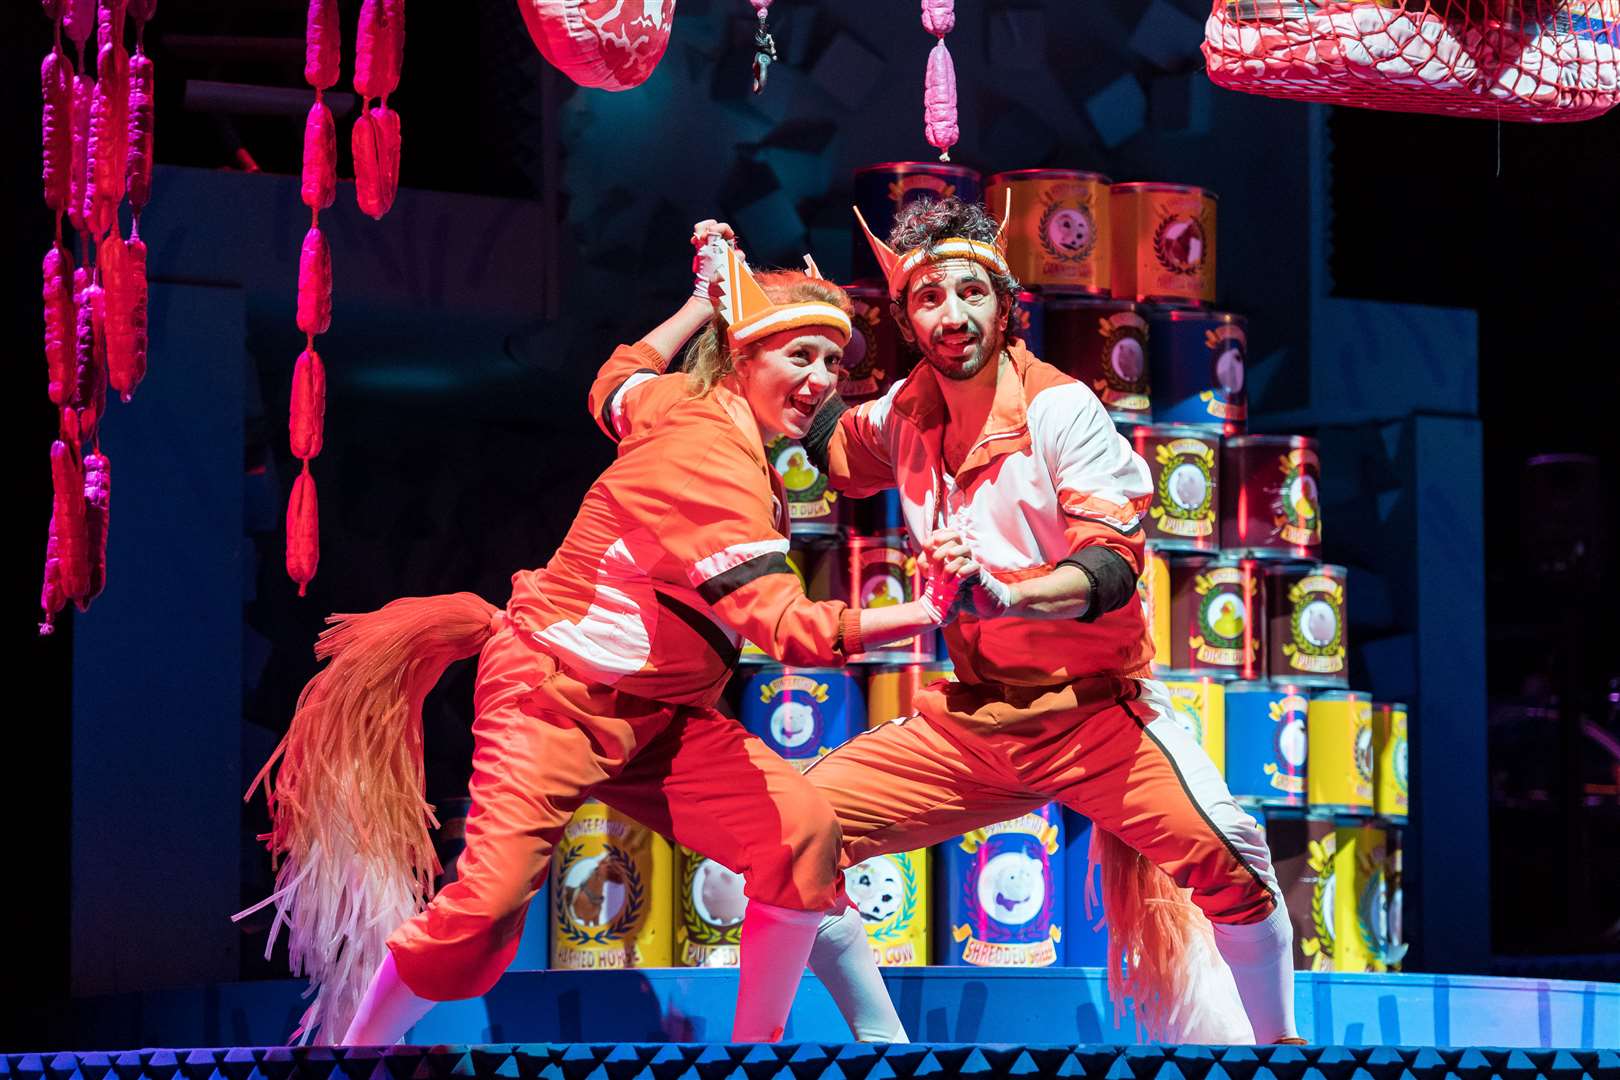 Fantastic Mr Fox is a juicy tale of greed, pride and the power of friendship, coming to Dartford